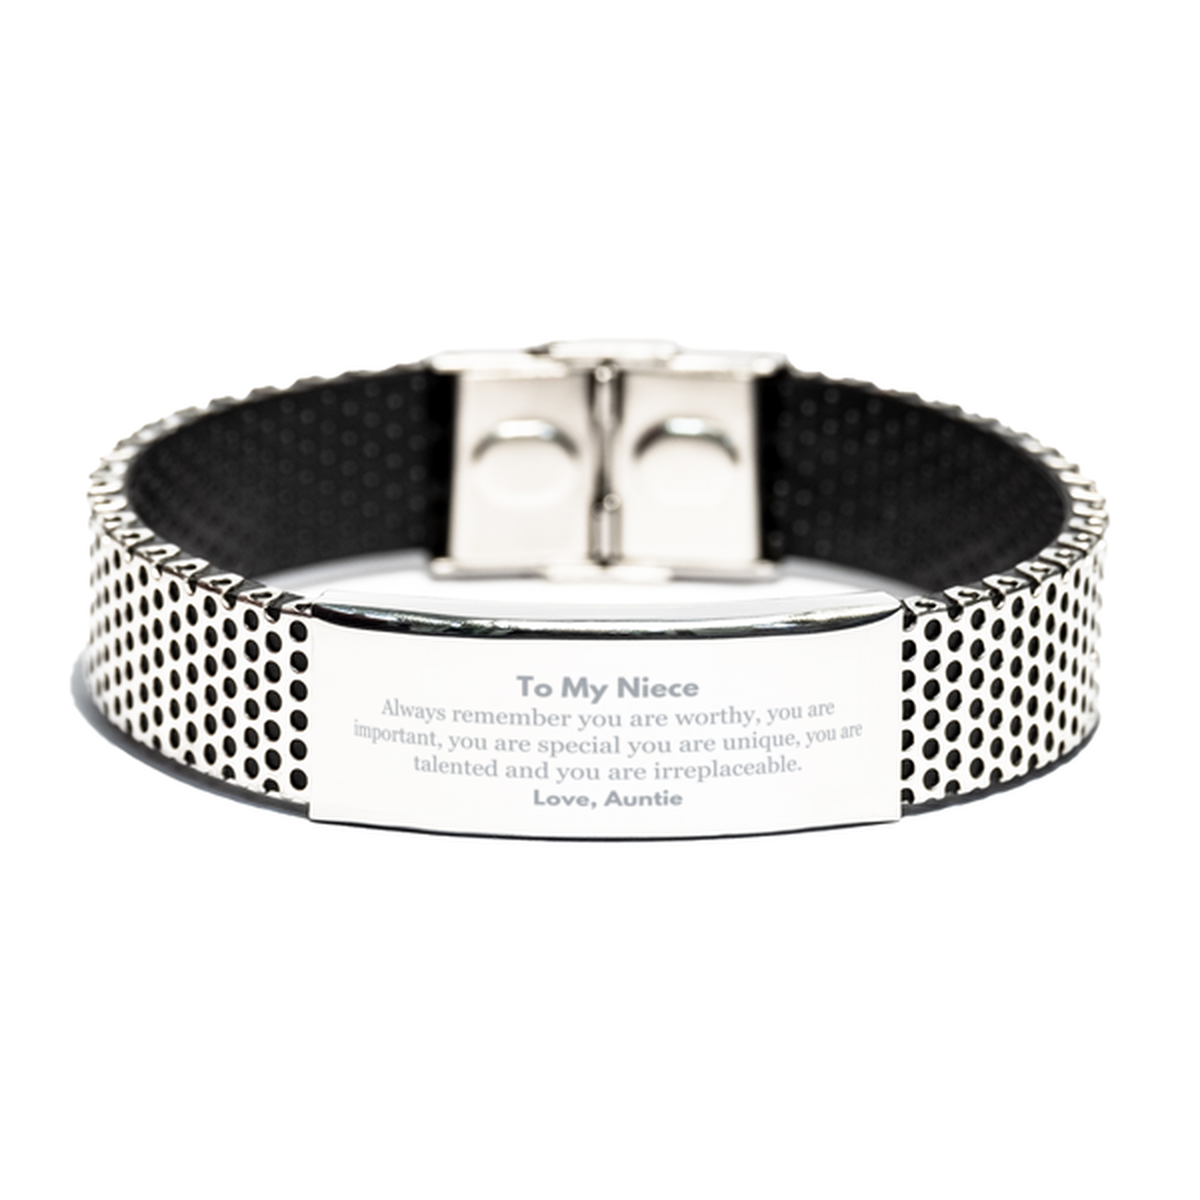 Niece Birthday Gifts from Auntie, Inspirational Stainless Steel Bracelet for Niece Christmas Graduation Gifts for Niece Always remember you are worthy, you are important. Love, Auntie